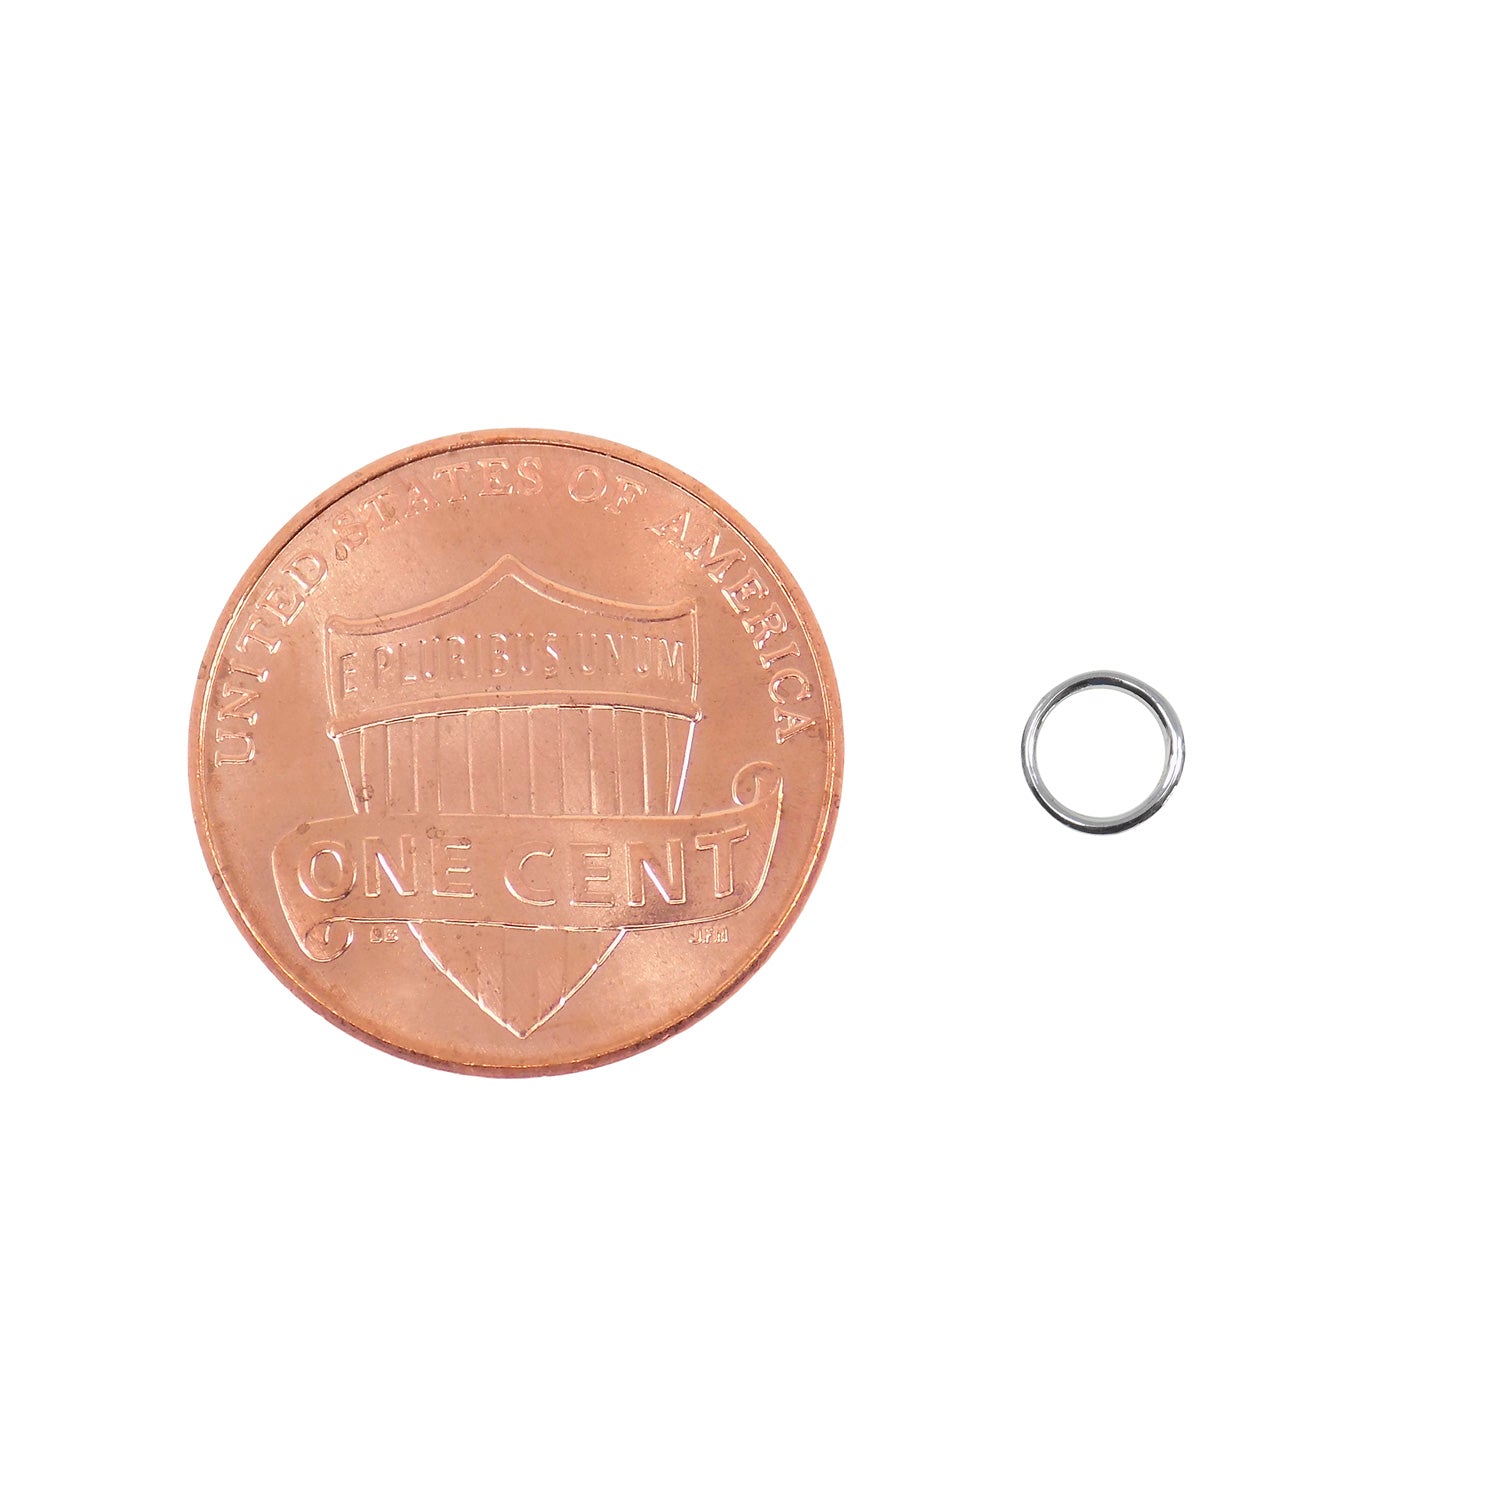 Closed Jump Ring 5mm (20 Pcs) Sterling Silver 22 ga (0.64x5.0mm) Soldered Silver Round Jump Ring.